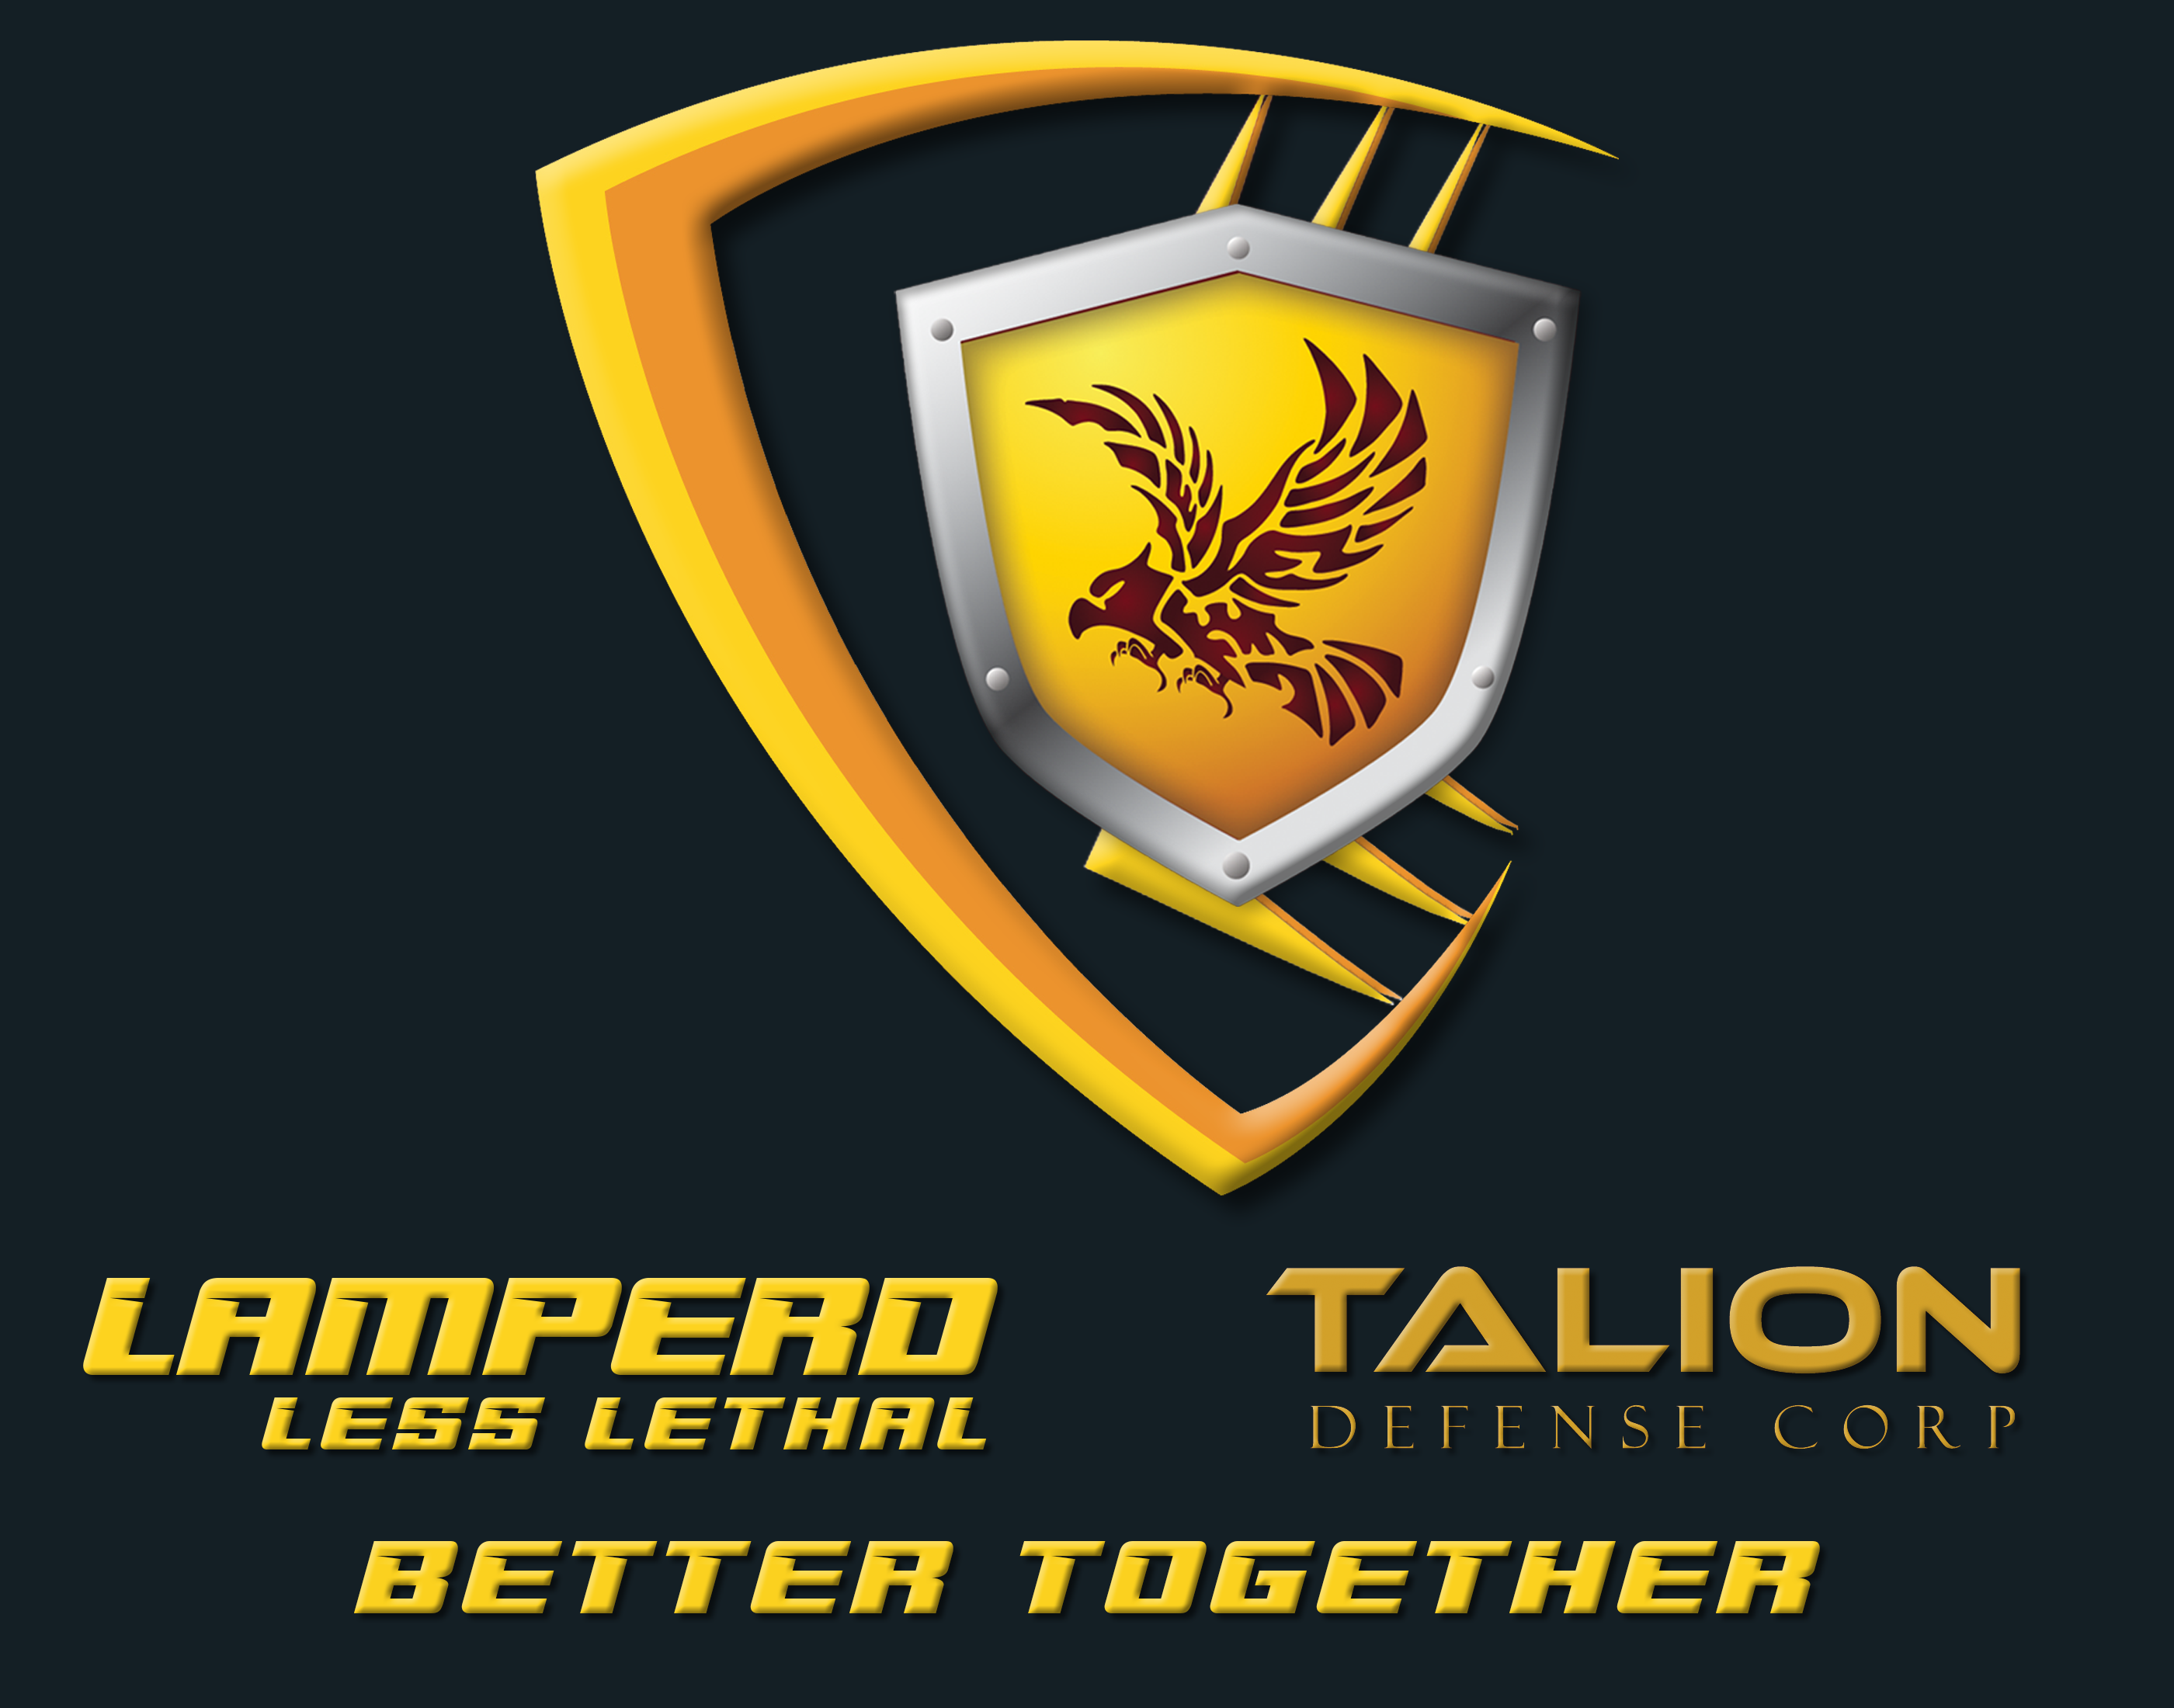 Lamperd Less Lethal and Talion Logos